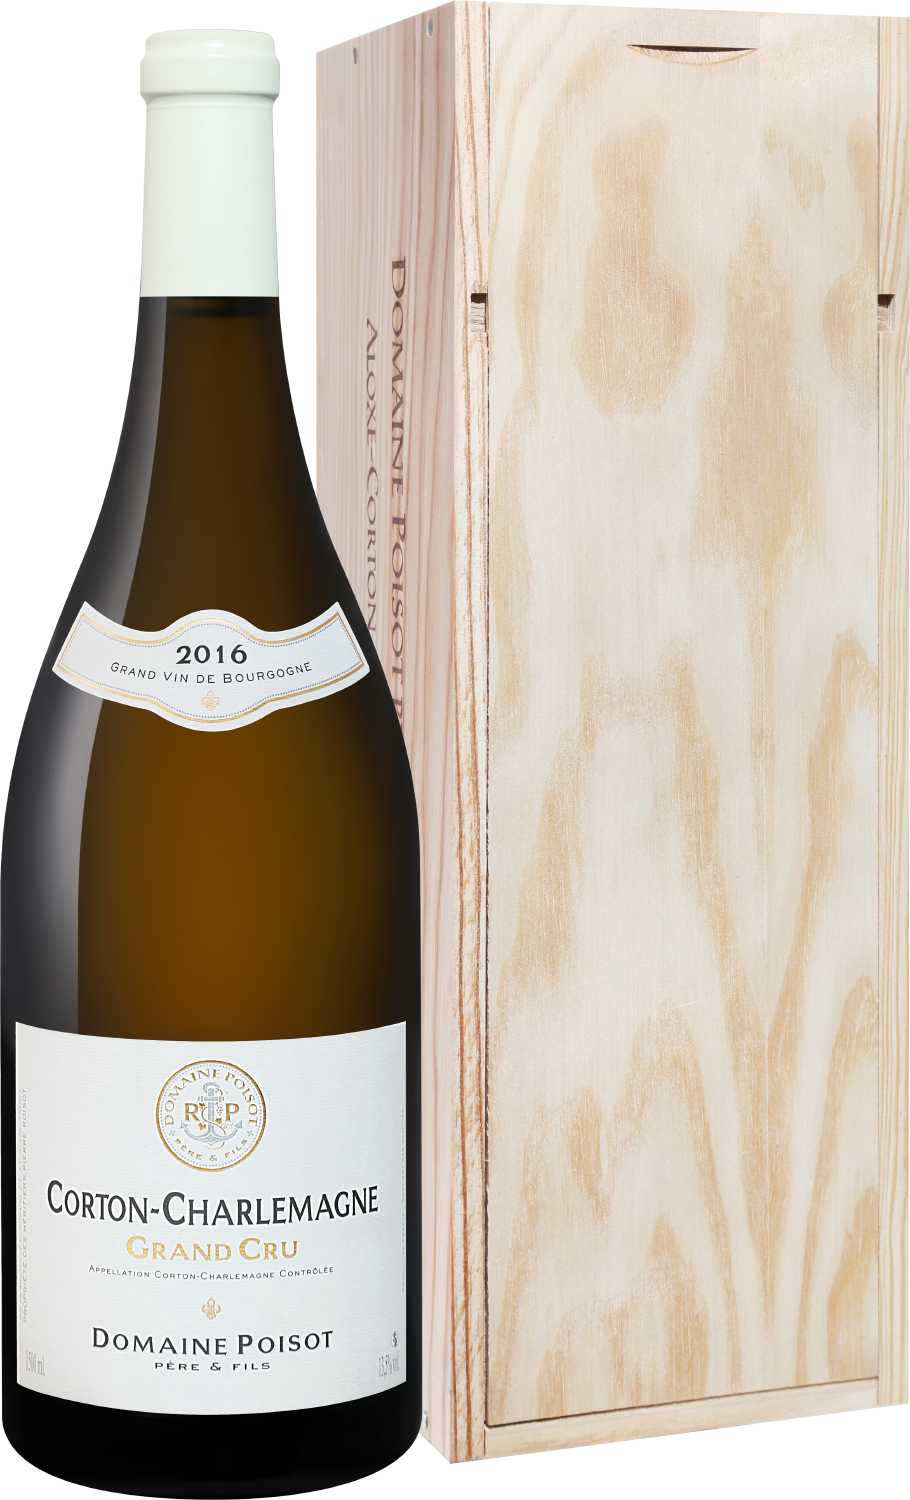 Corton-Charlemagne Grand Cru AOC Domaine Poisot Pere and Fils (gift box) en caradeux pernand vergelesses 1er cru aoc domaine poisot pere and fils